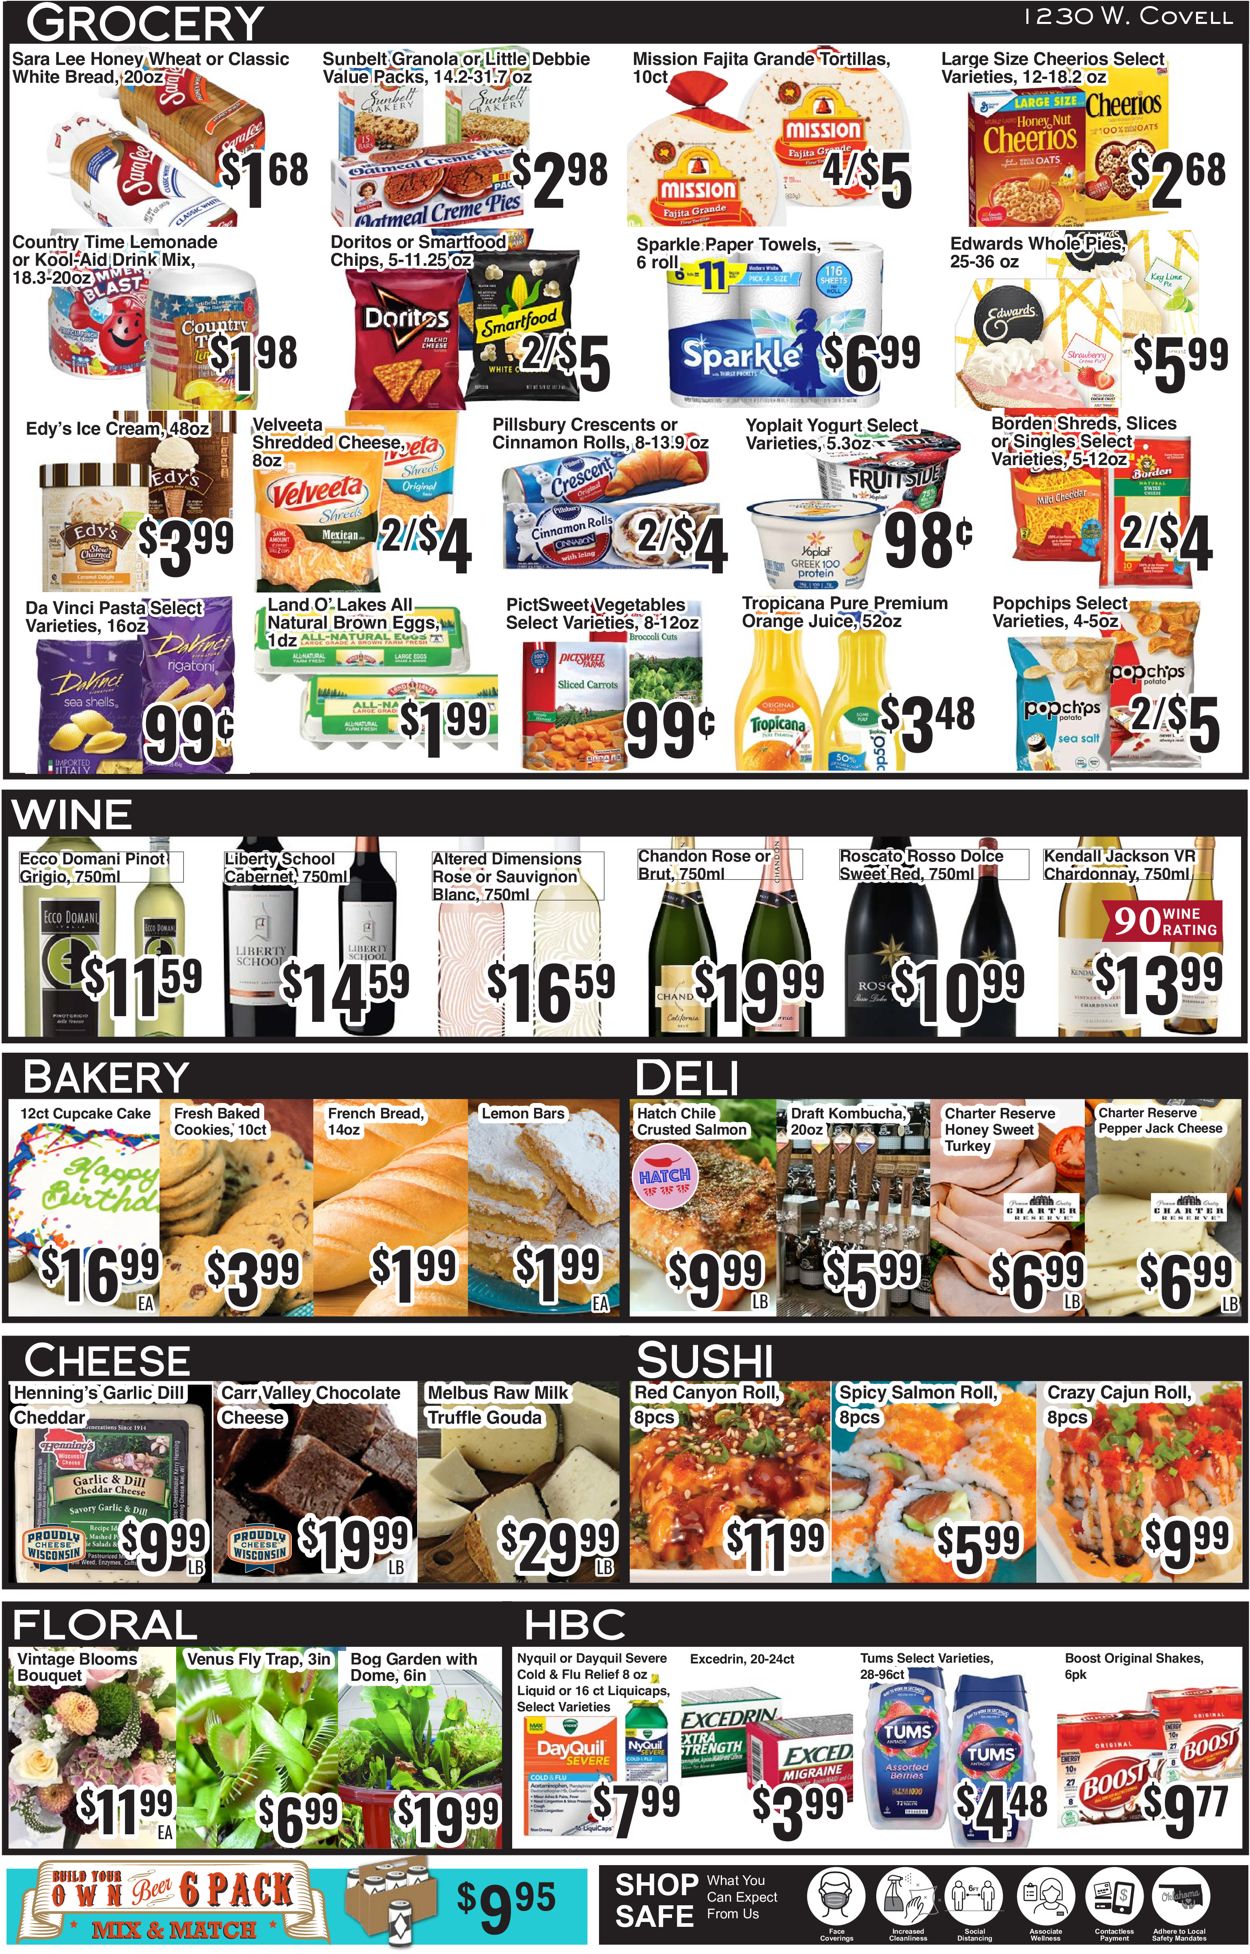 Uptown Grocery Co. Weekly Ad Circular - valid 08/26-09/01/2020 (Page 2)